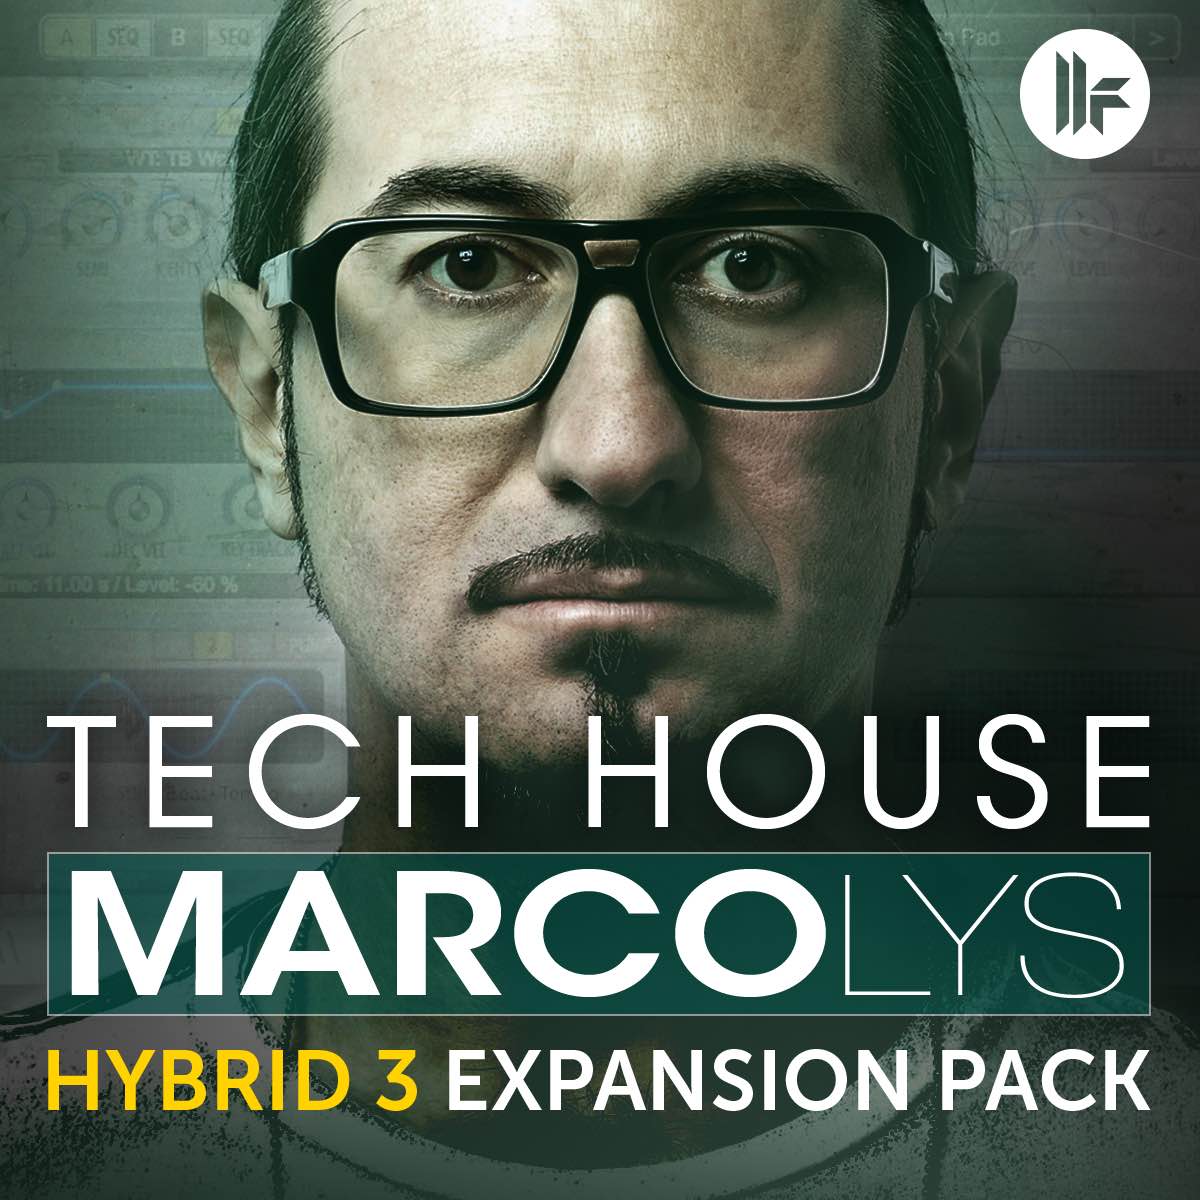 Marco Lys Expansion for Hybrid 3